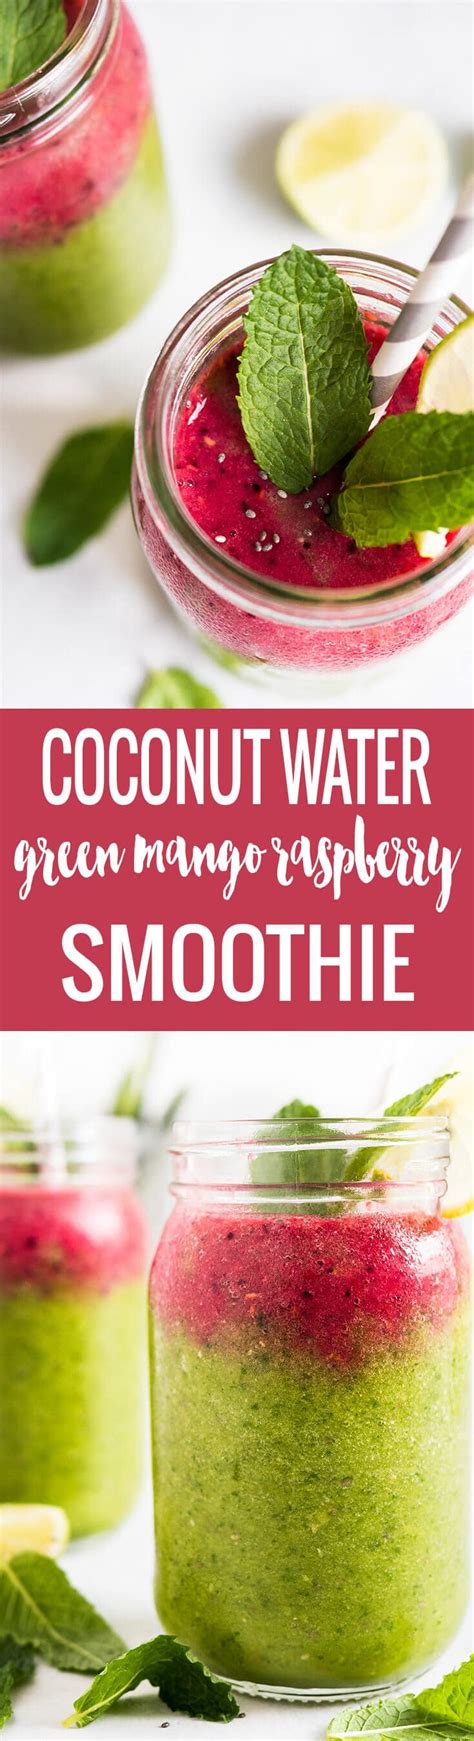 The recipes you'll find here are vegetarian, often vegan, written with the home cook in mind. Coconut Water Smoothie w/ raspberries and spinach (vegan)